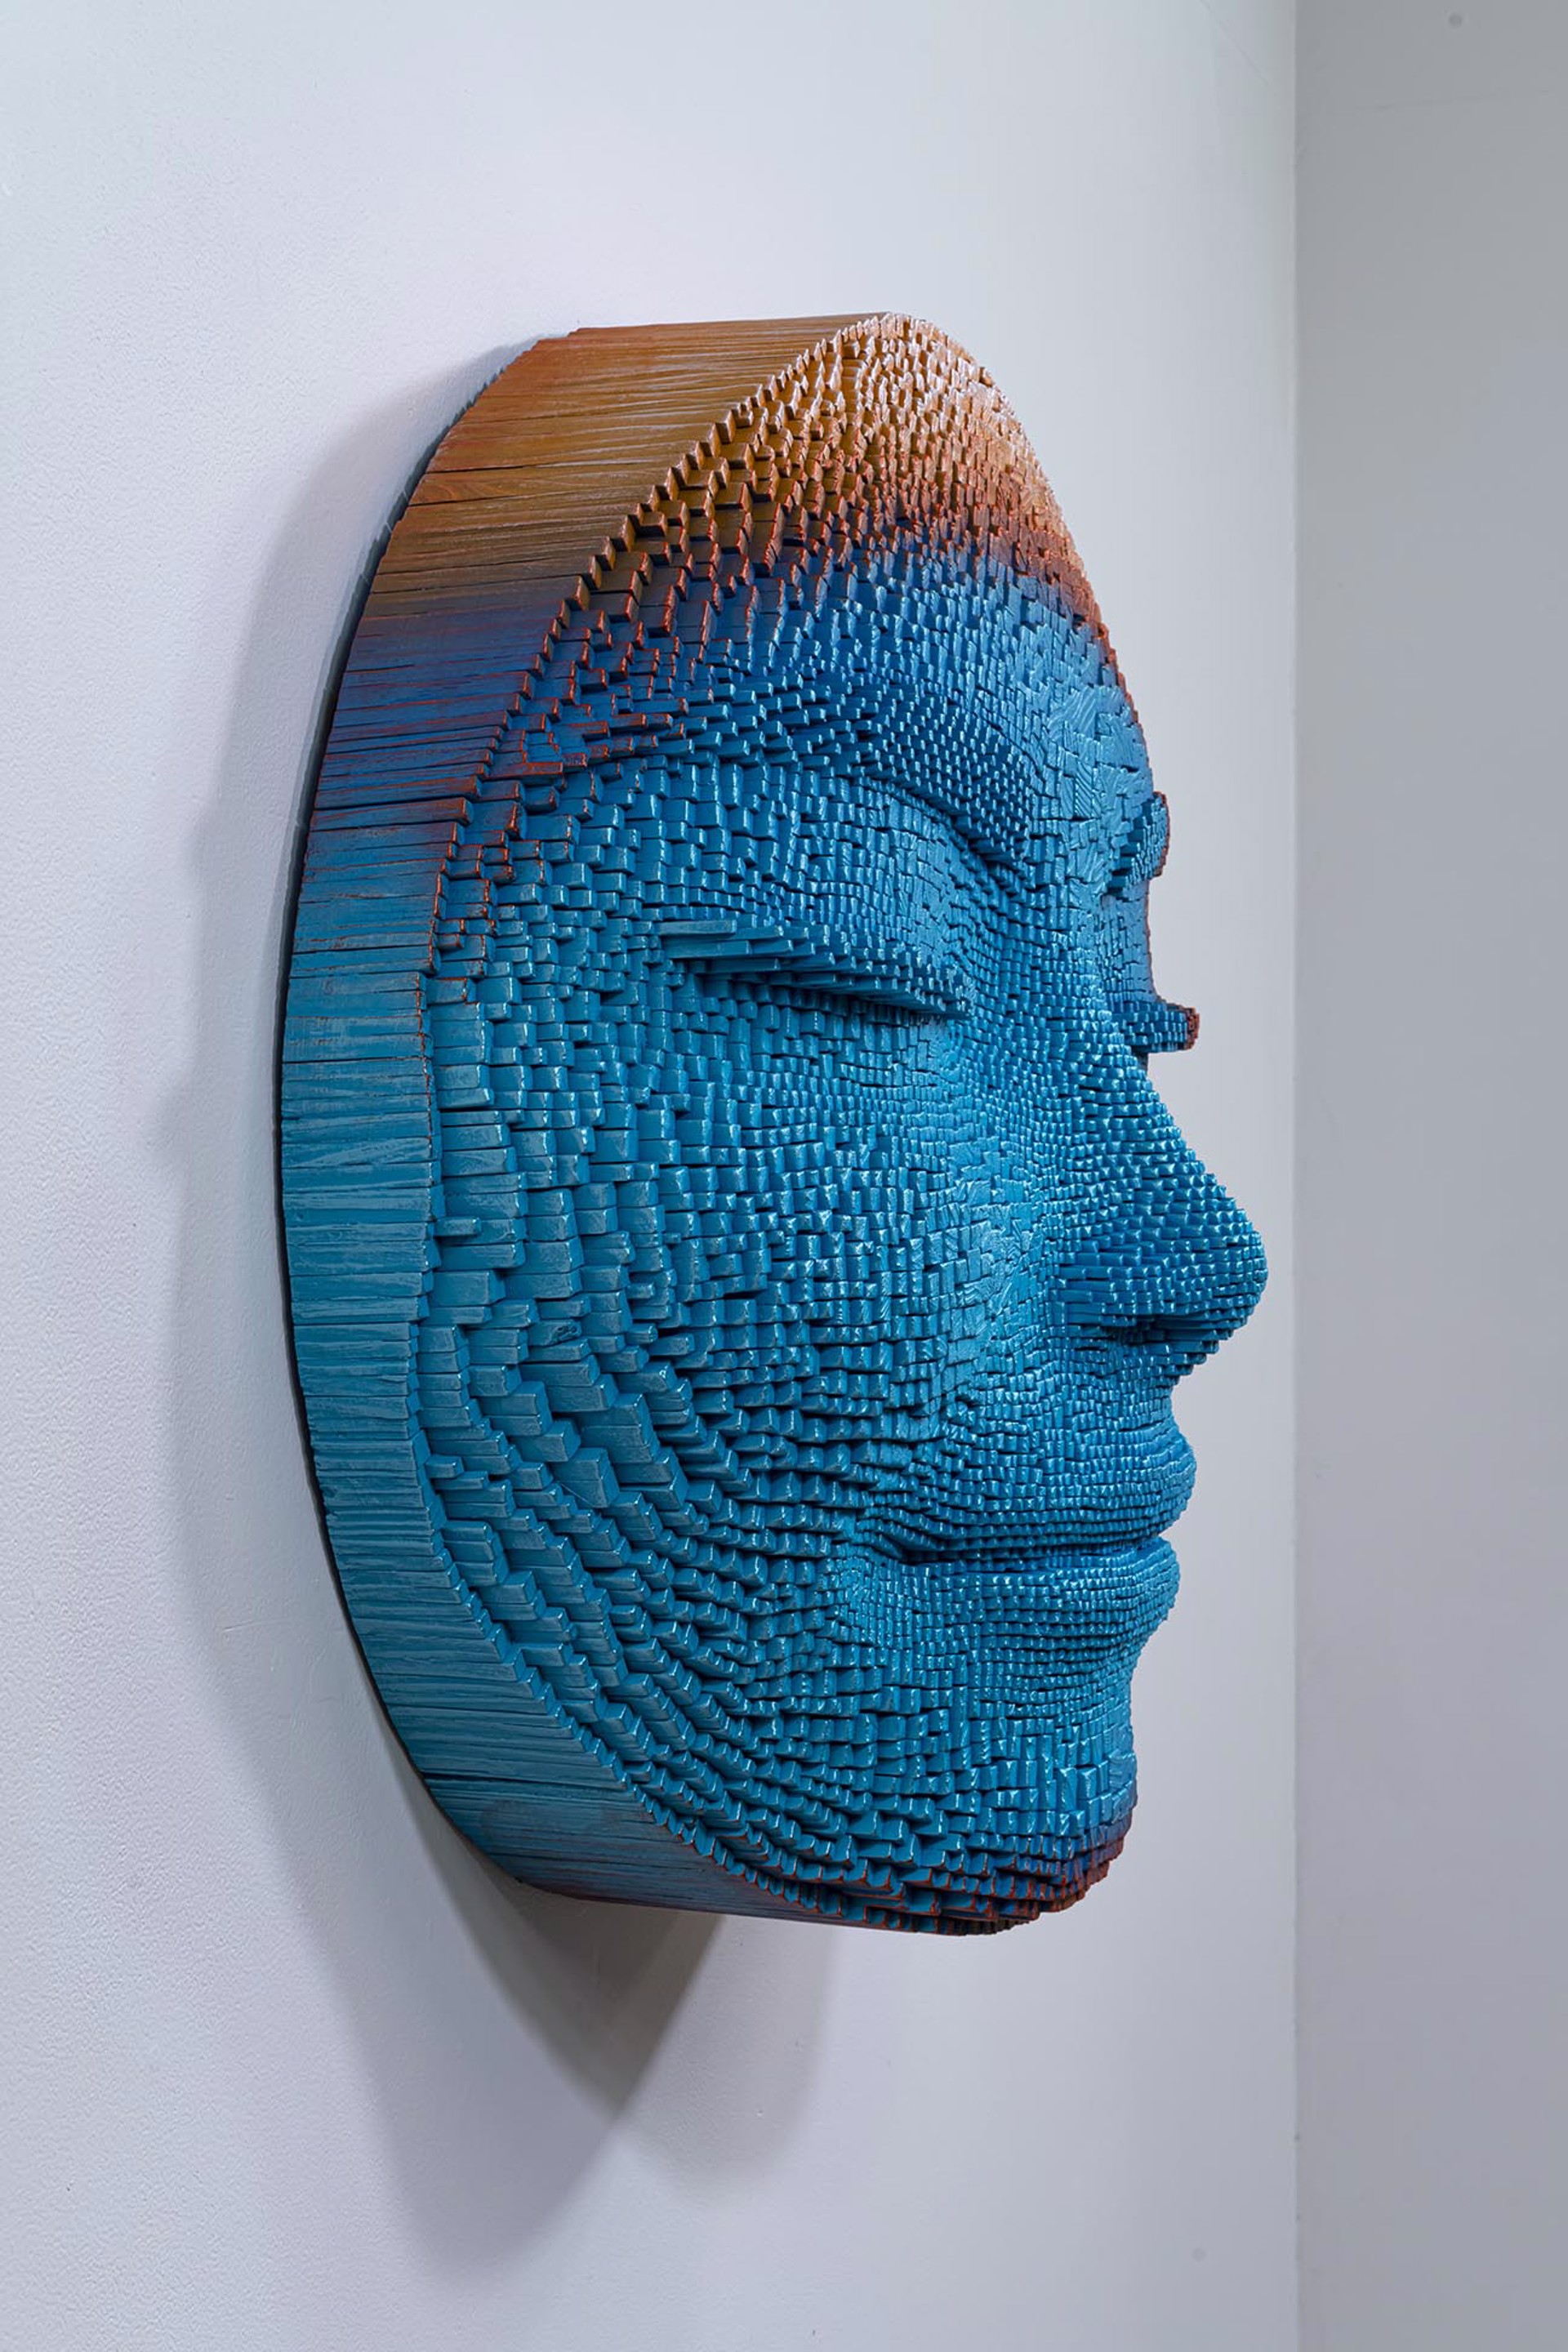 Eclipse #2 by Gil Bruvel